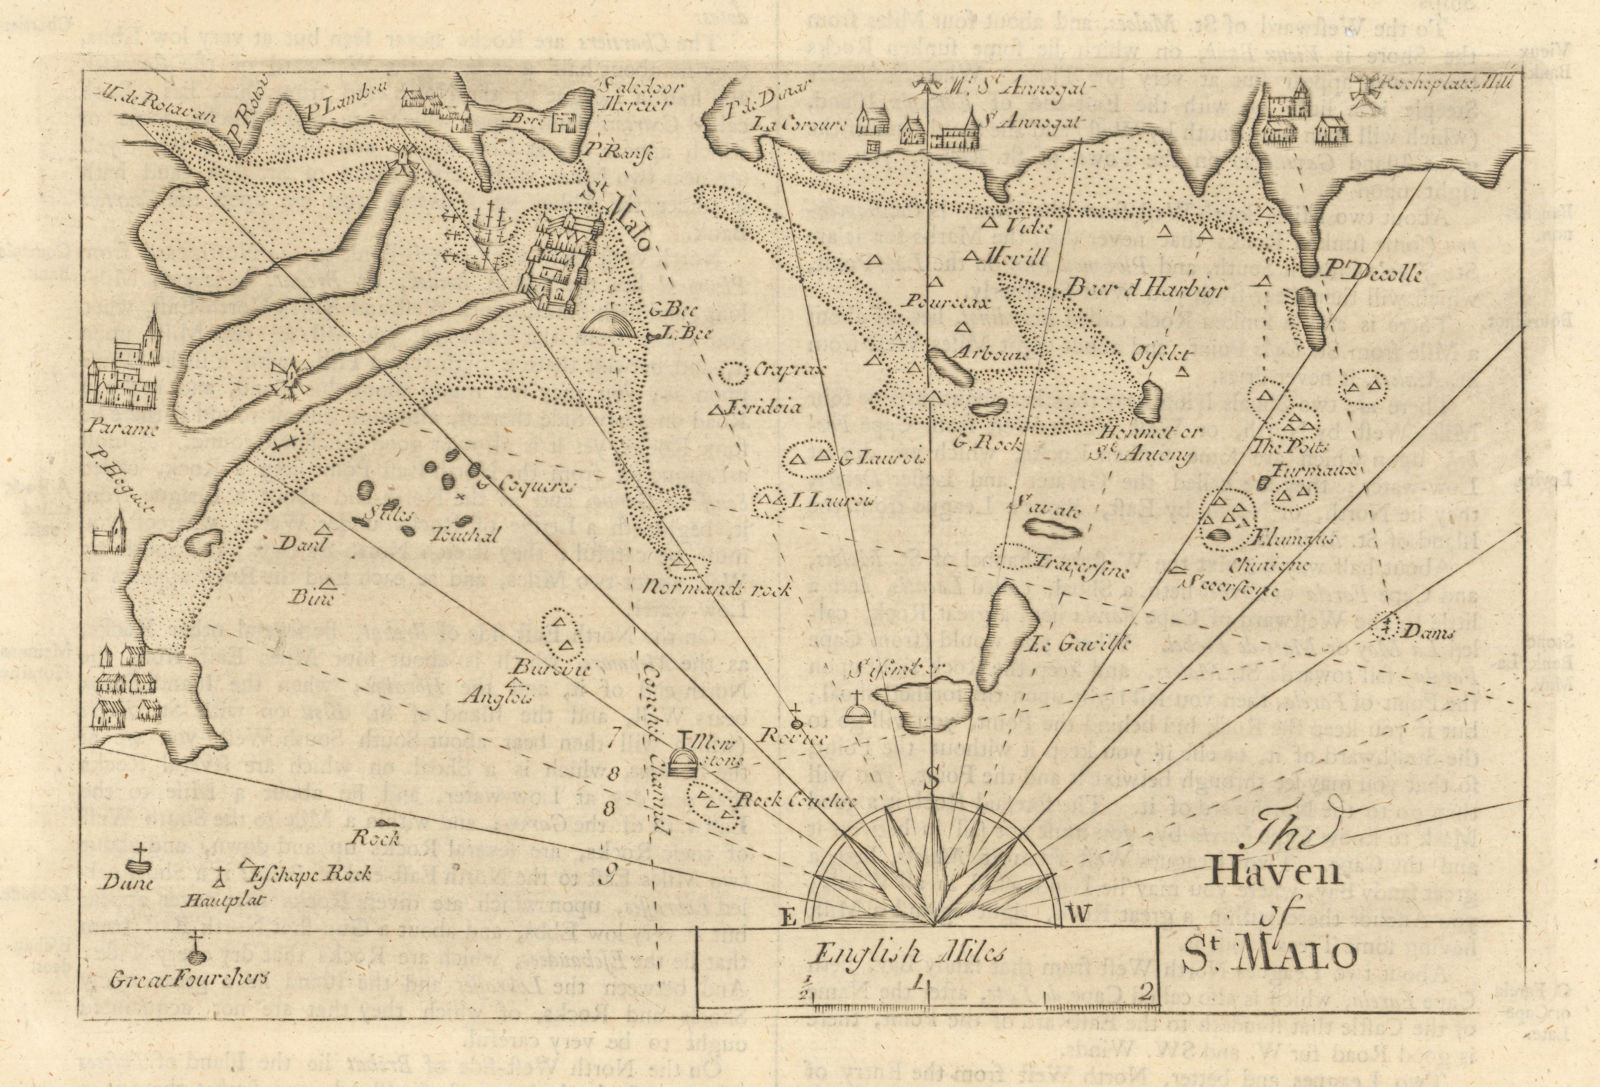 Associate Product "The haven of St. Malo". Dinard Saint-Enogat. MOUNT & PAGE sea chart 1758 map